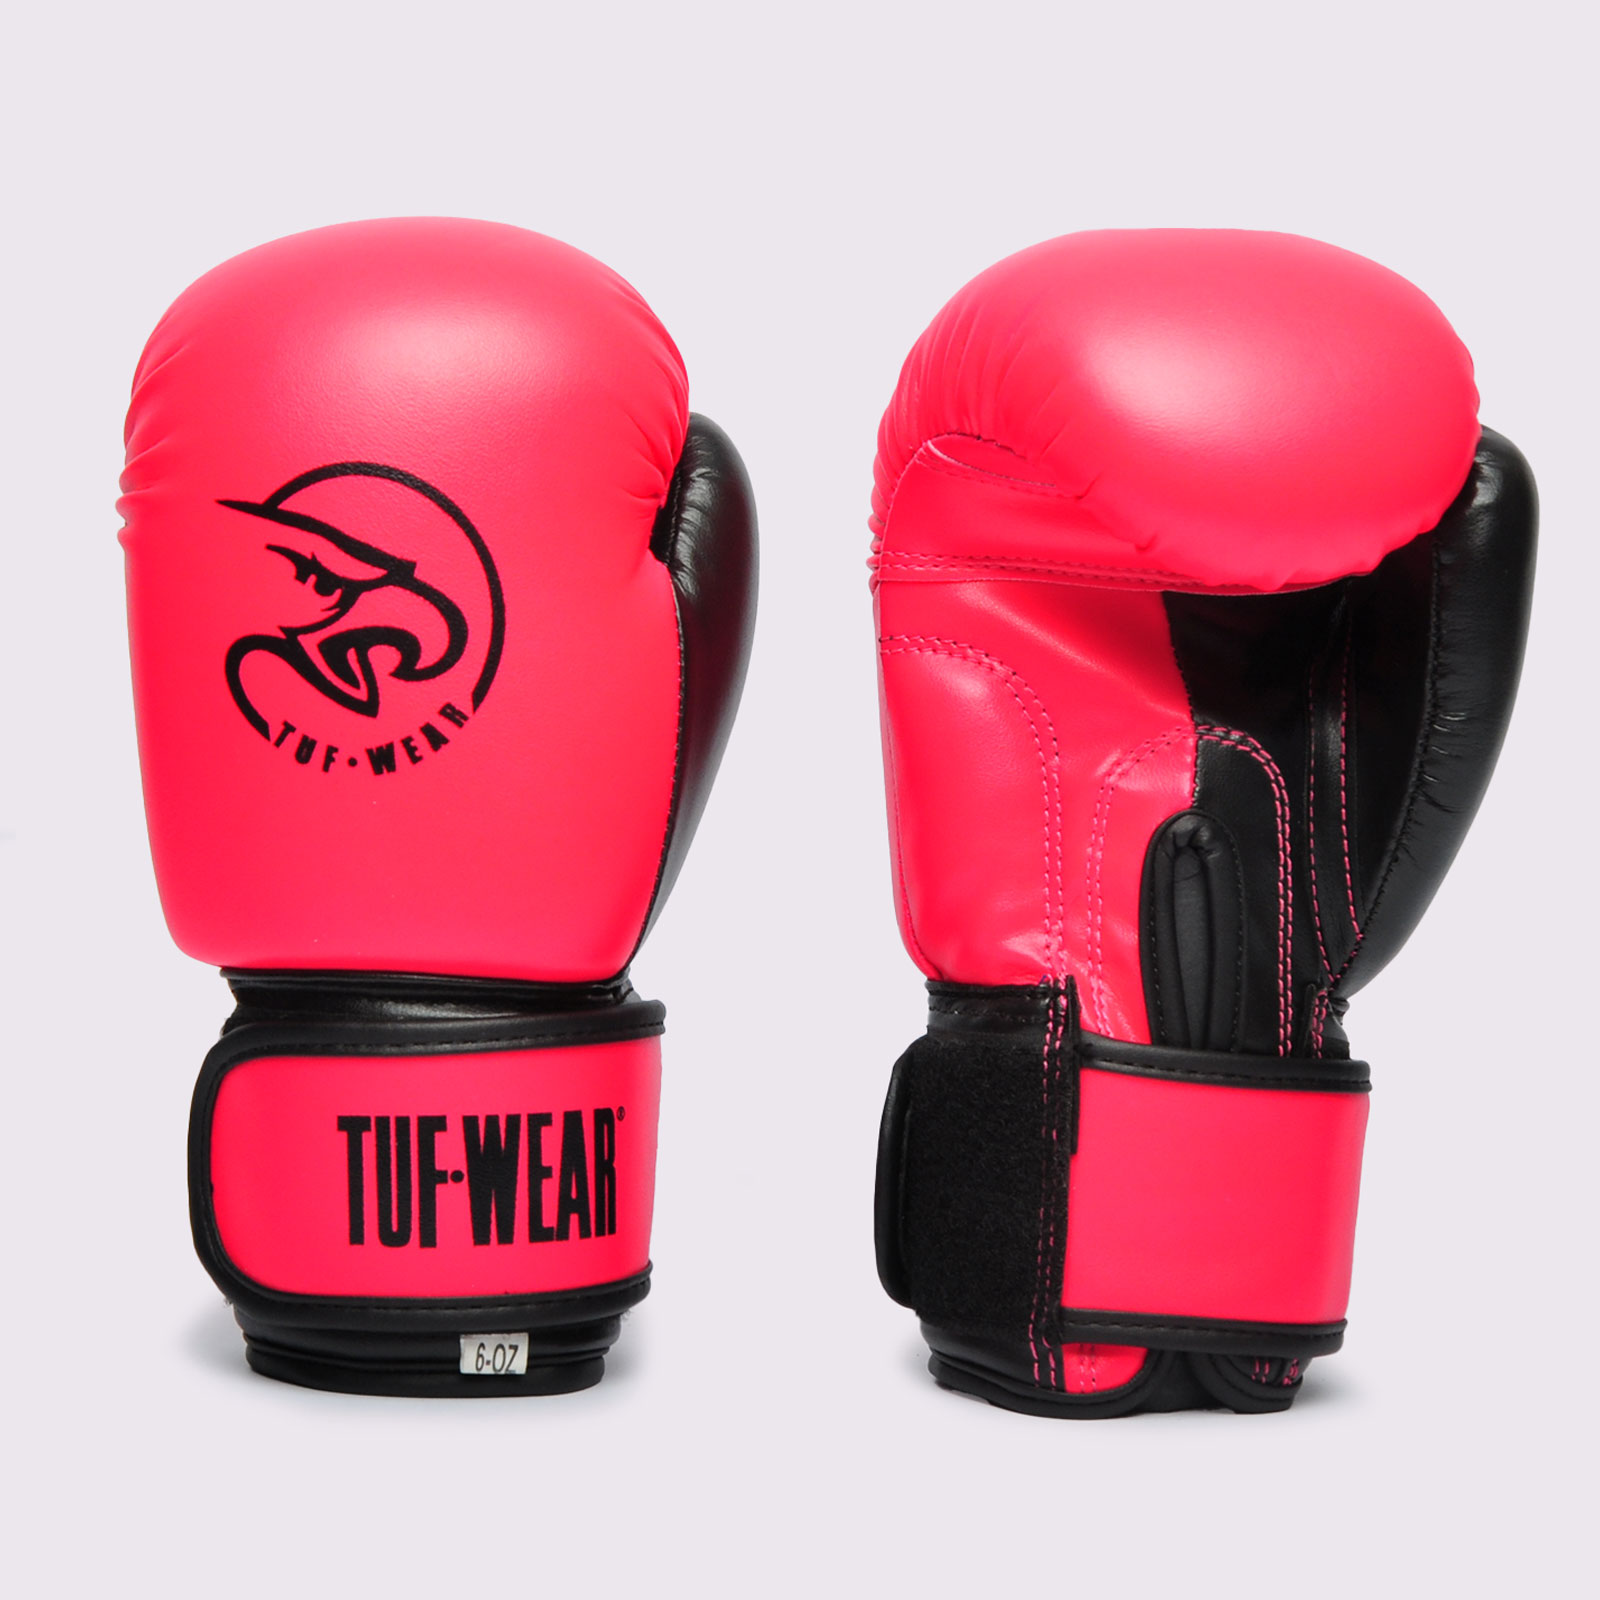 TUF WEAR LEGEND Leather Training Hook and Loop Sparring Glove Red £59.99 -  PicClick UK